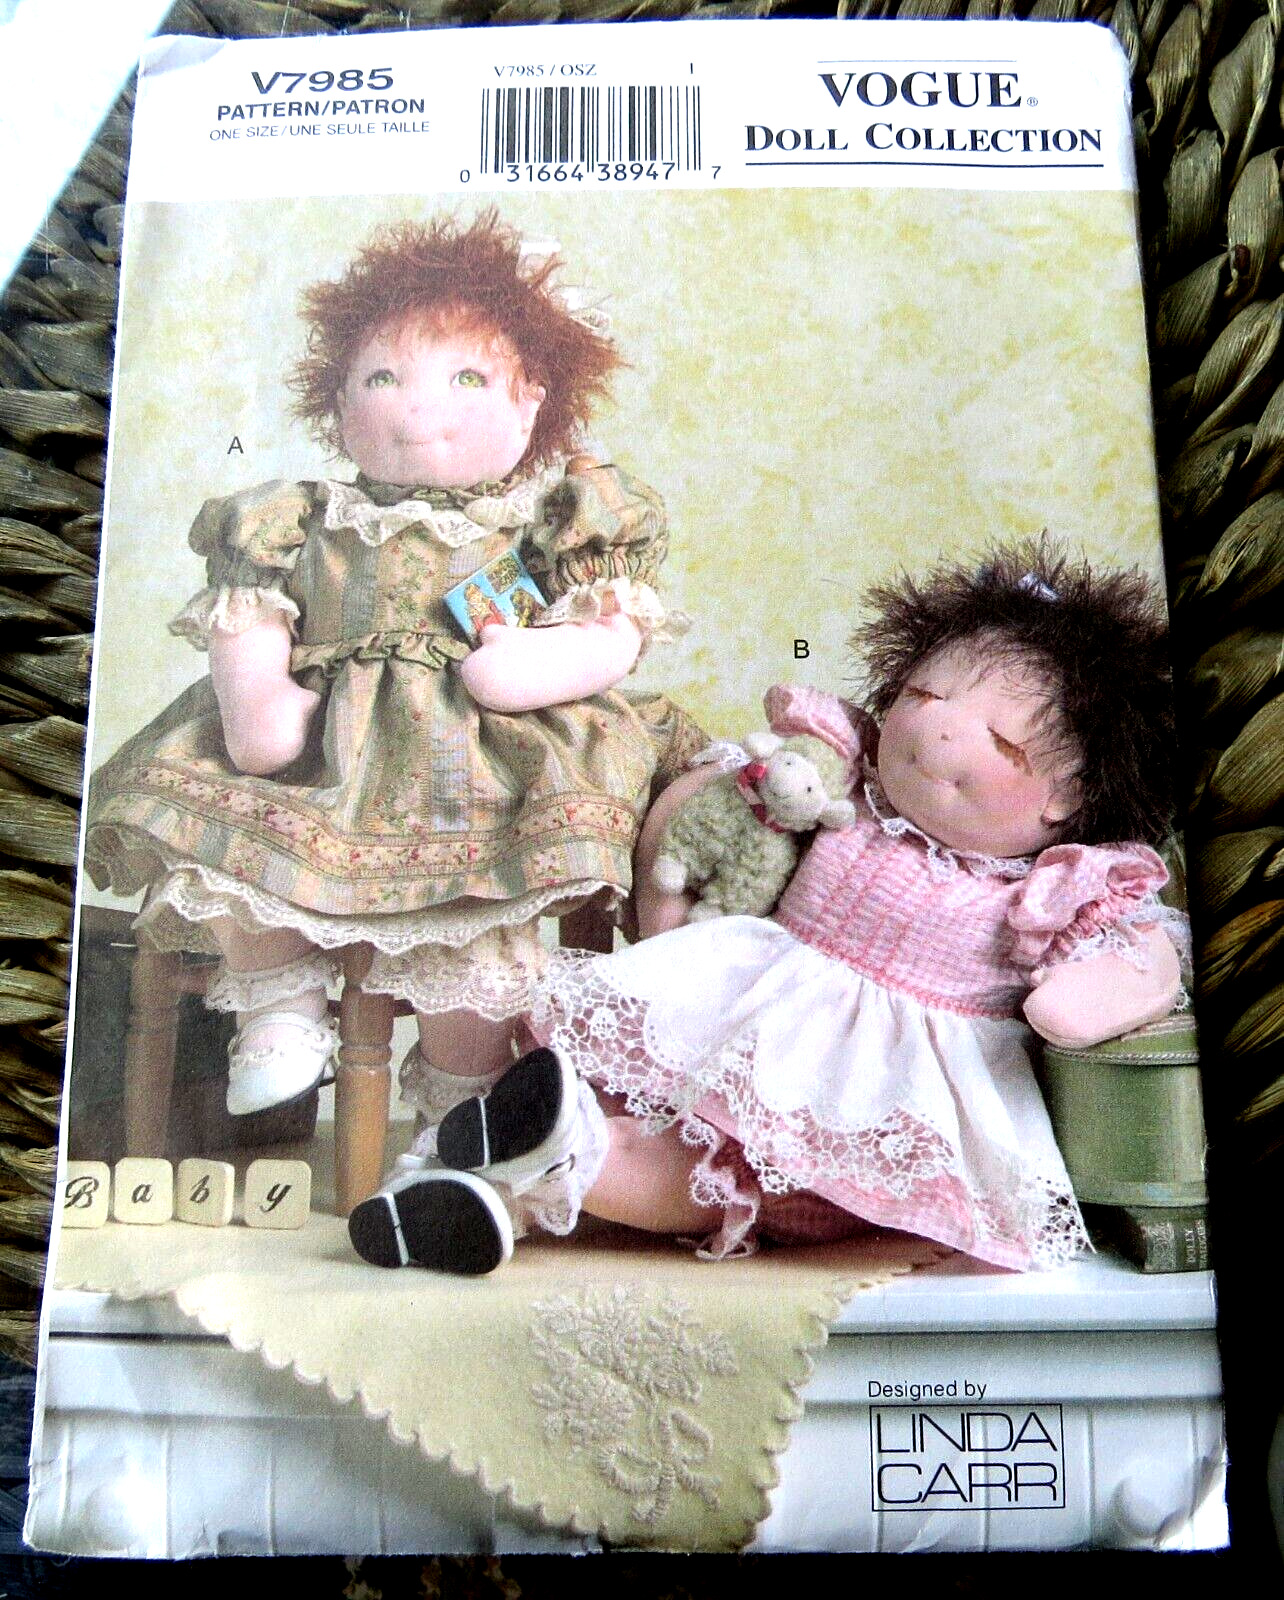 VOGUE DOLL COLLECTION PATTERNS #V7985 8013 BABY DOLLS CLOTHES